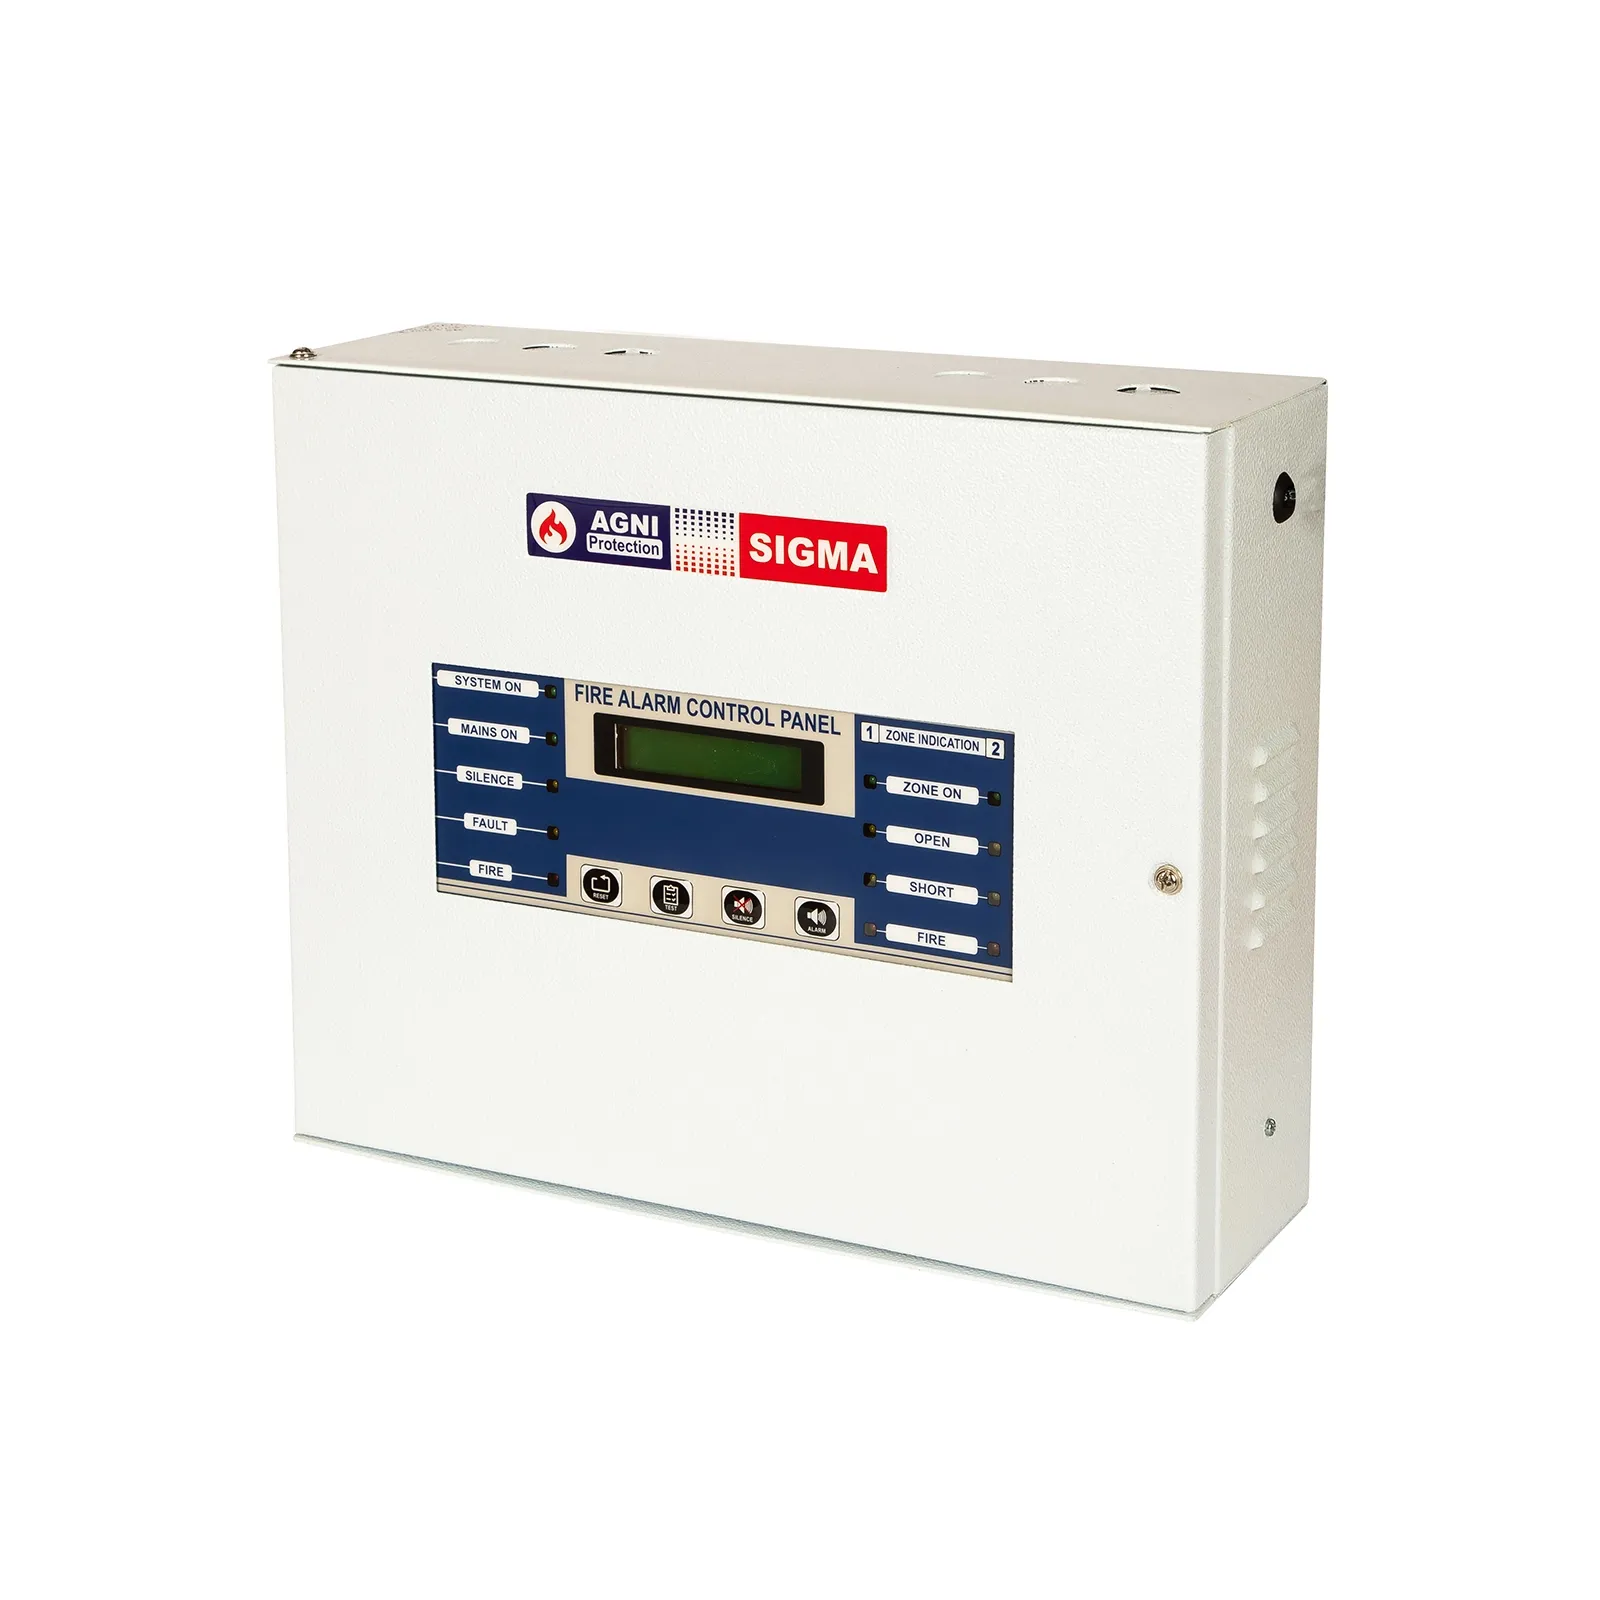 2 ZONE CONVENTIONAL FIRE ALARM PANEL